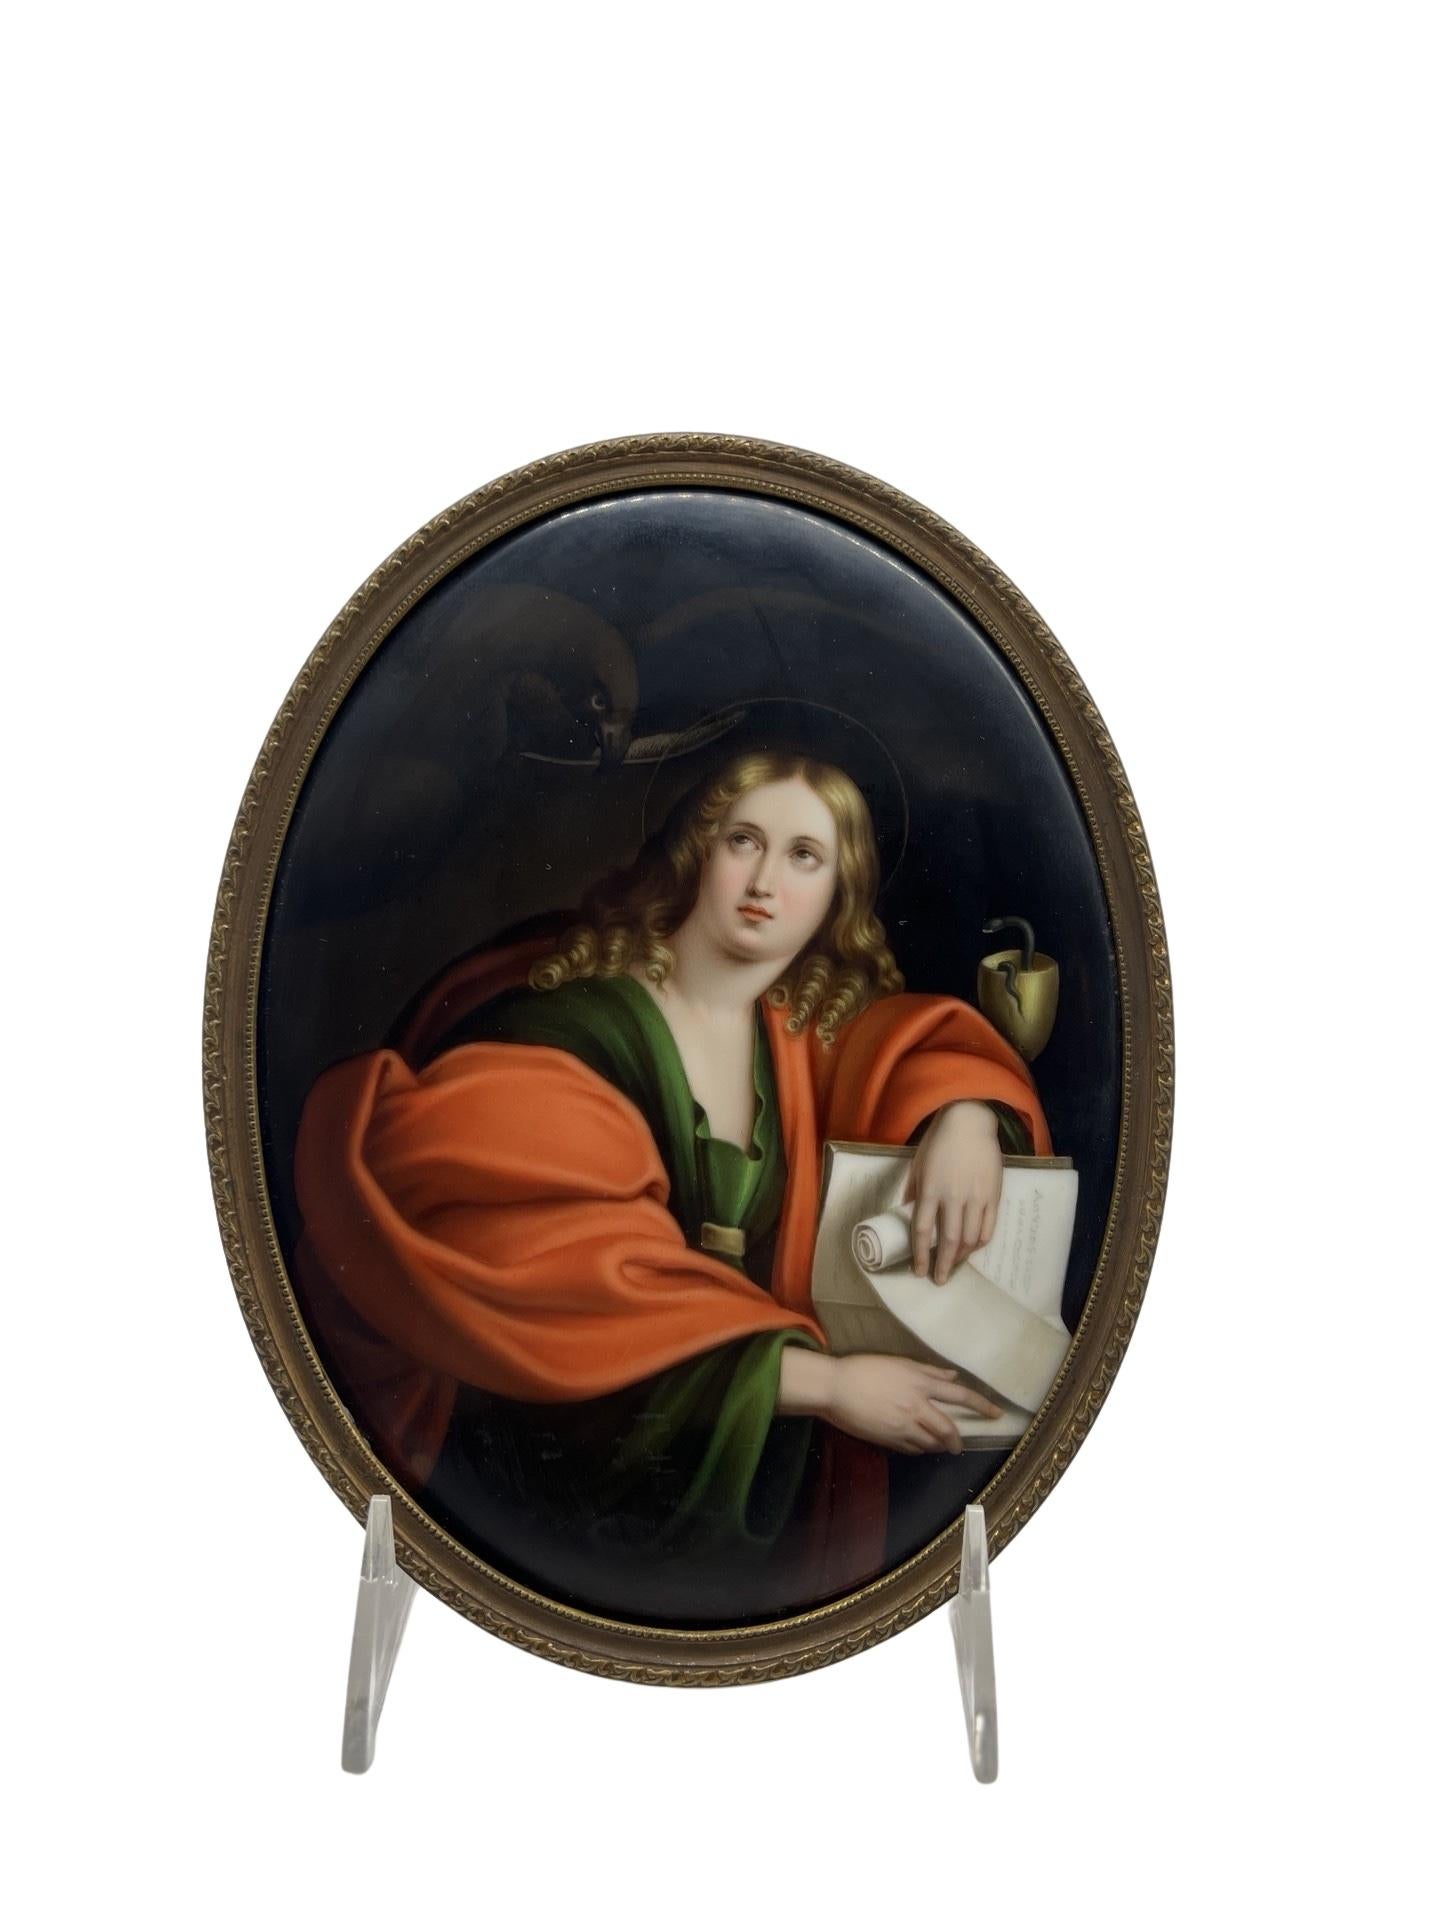 Continental, 19th century. 
A fine quality antique porcelain plaque depicting John The Evangelist after the original antiquity by Domenichino (Italian, 1581-1641). The plaque depicts a young John The Evangelist pearing at a hawk holding his quill